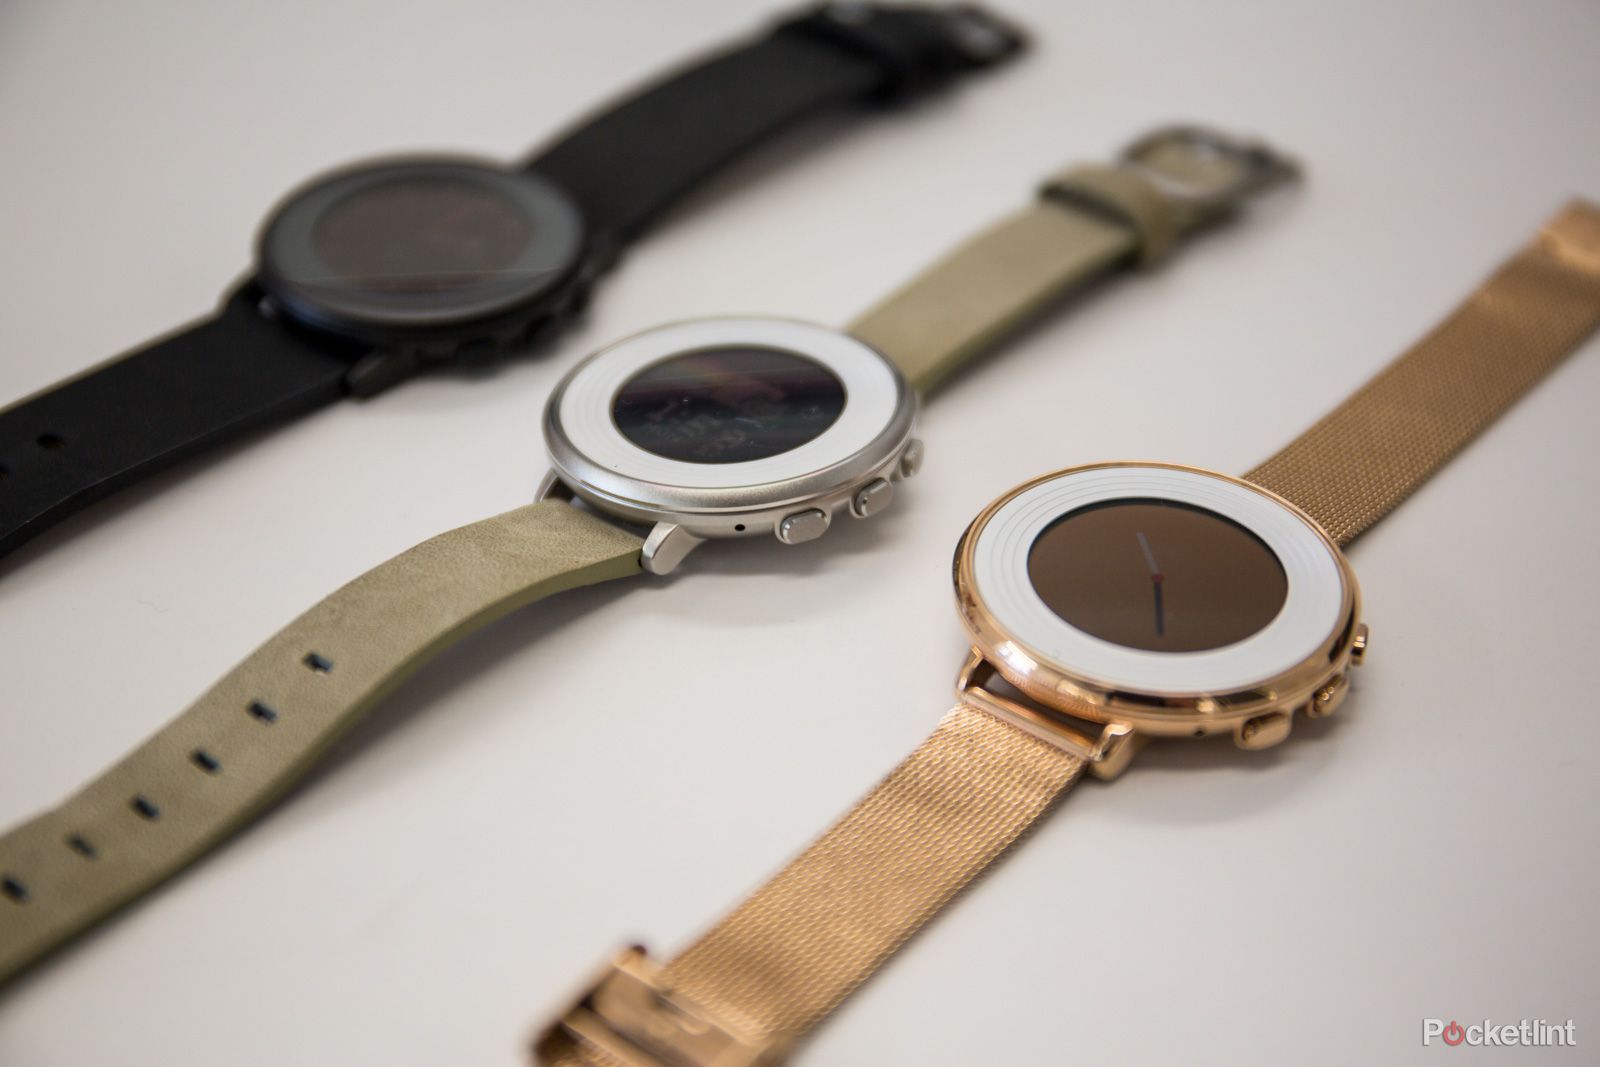 pebble time round coming to the uk sooner than you think we take a first look image 1